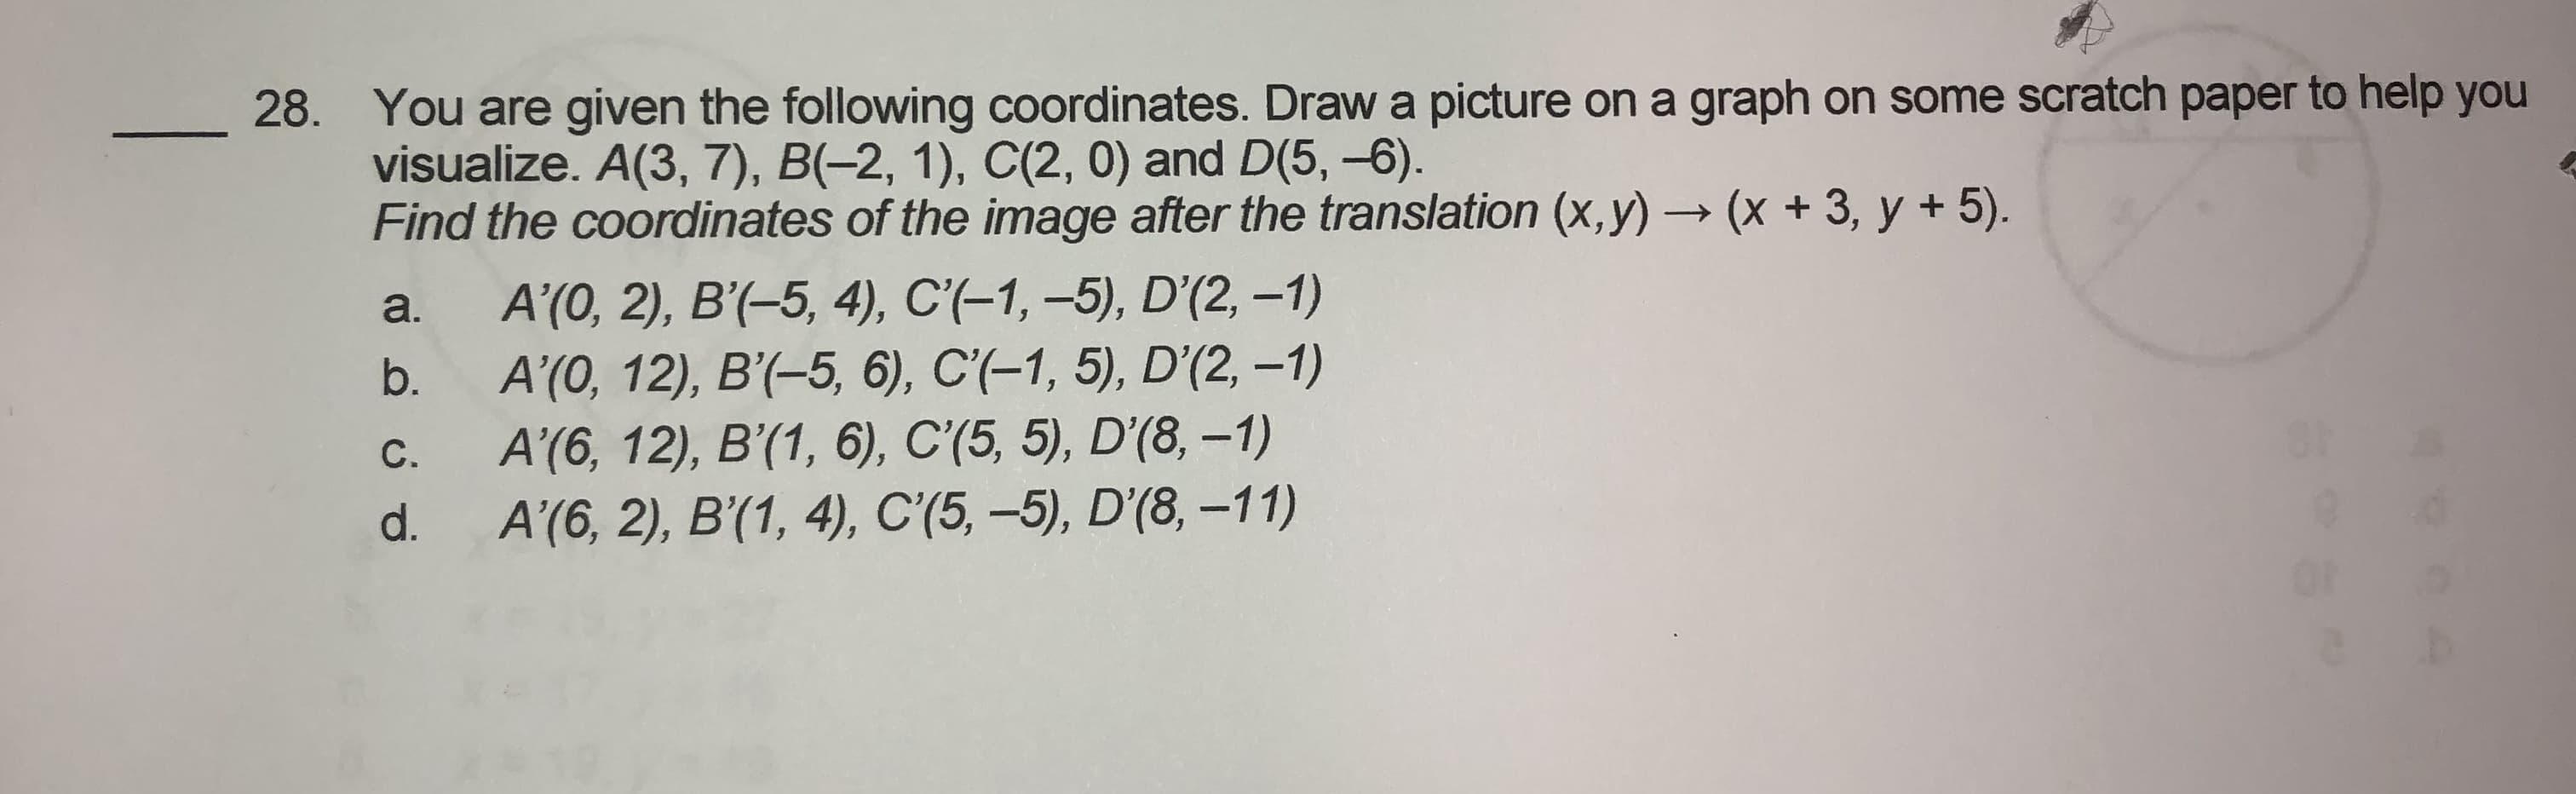 You are given the following coordinates. Draw a picture on a graph on some scratch paper to help y
visualize. A(3, 7), B(-2, 1), C(2, 0) and D(5, -6).
Find the coordinates of the image after the translation (x,y) → (x + 3, y + 5).
